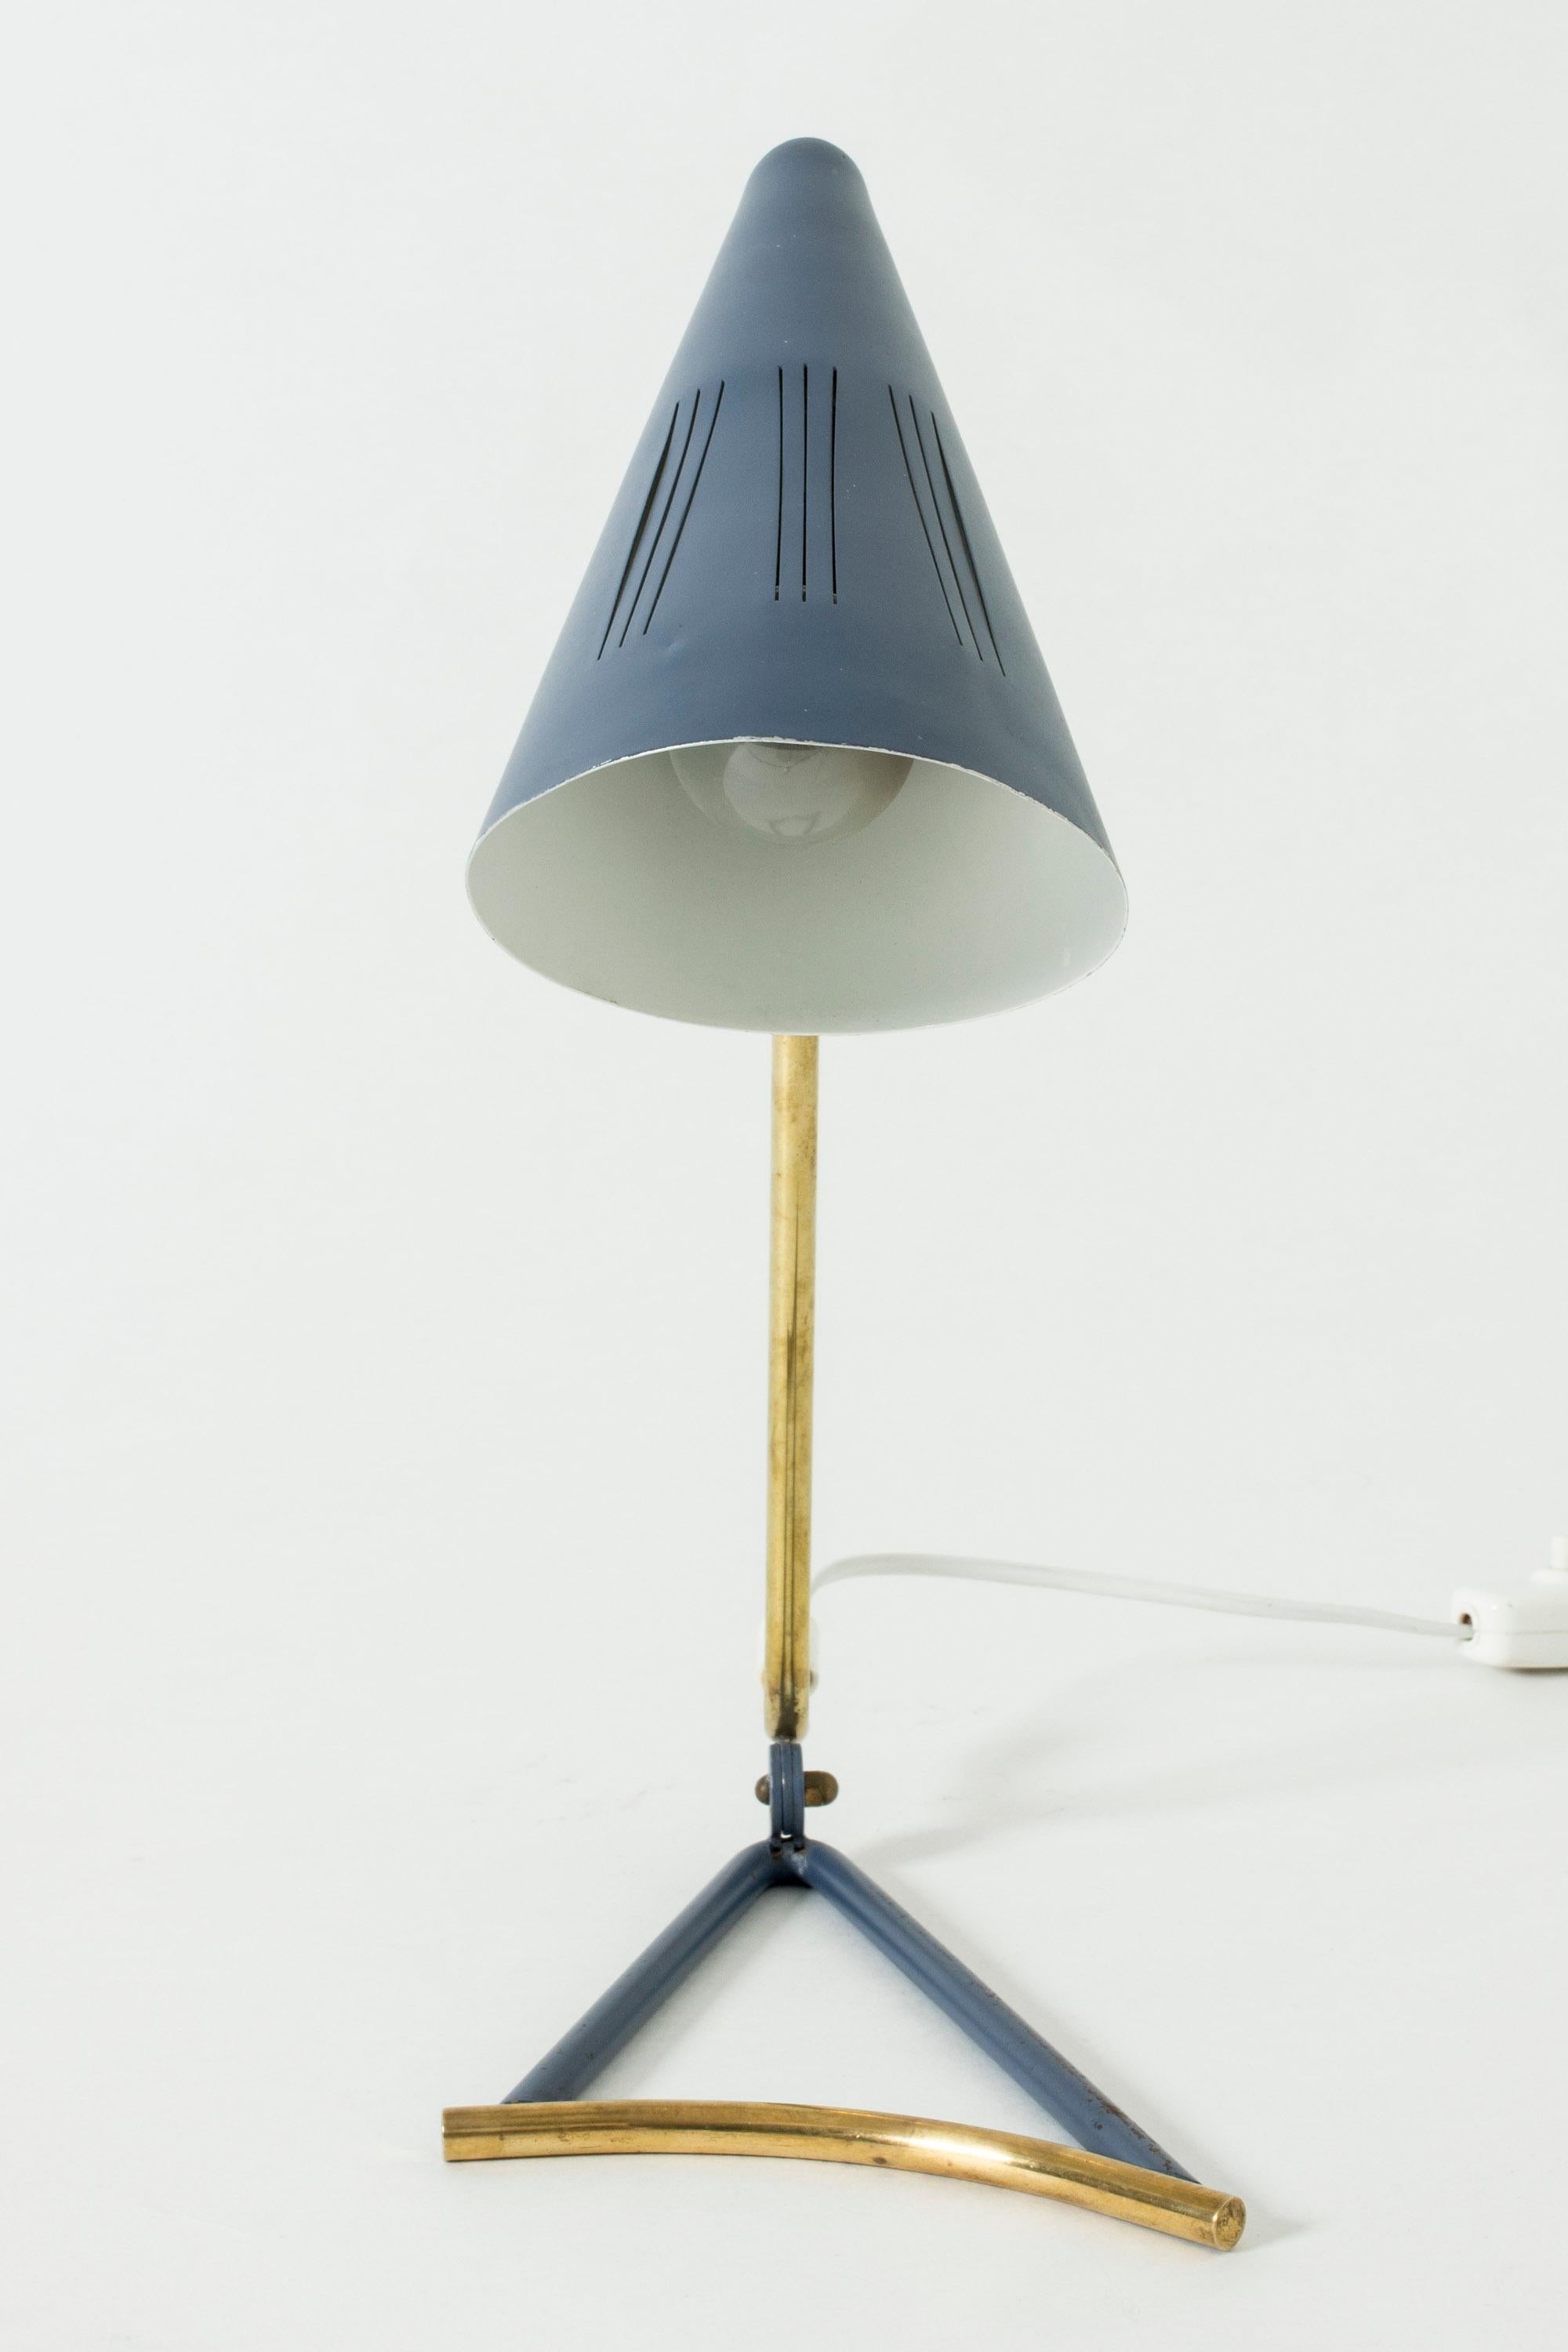 Scandinavian Modern Lacquered Metal Table Lamp by Knud Joos for Lyfa, Denmark, 1950s